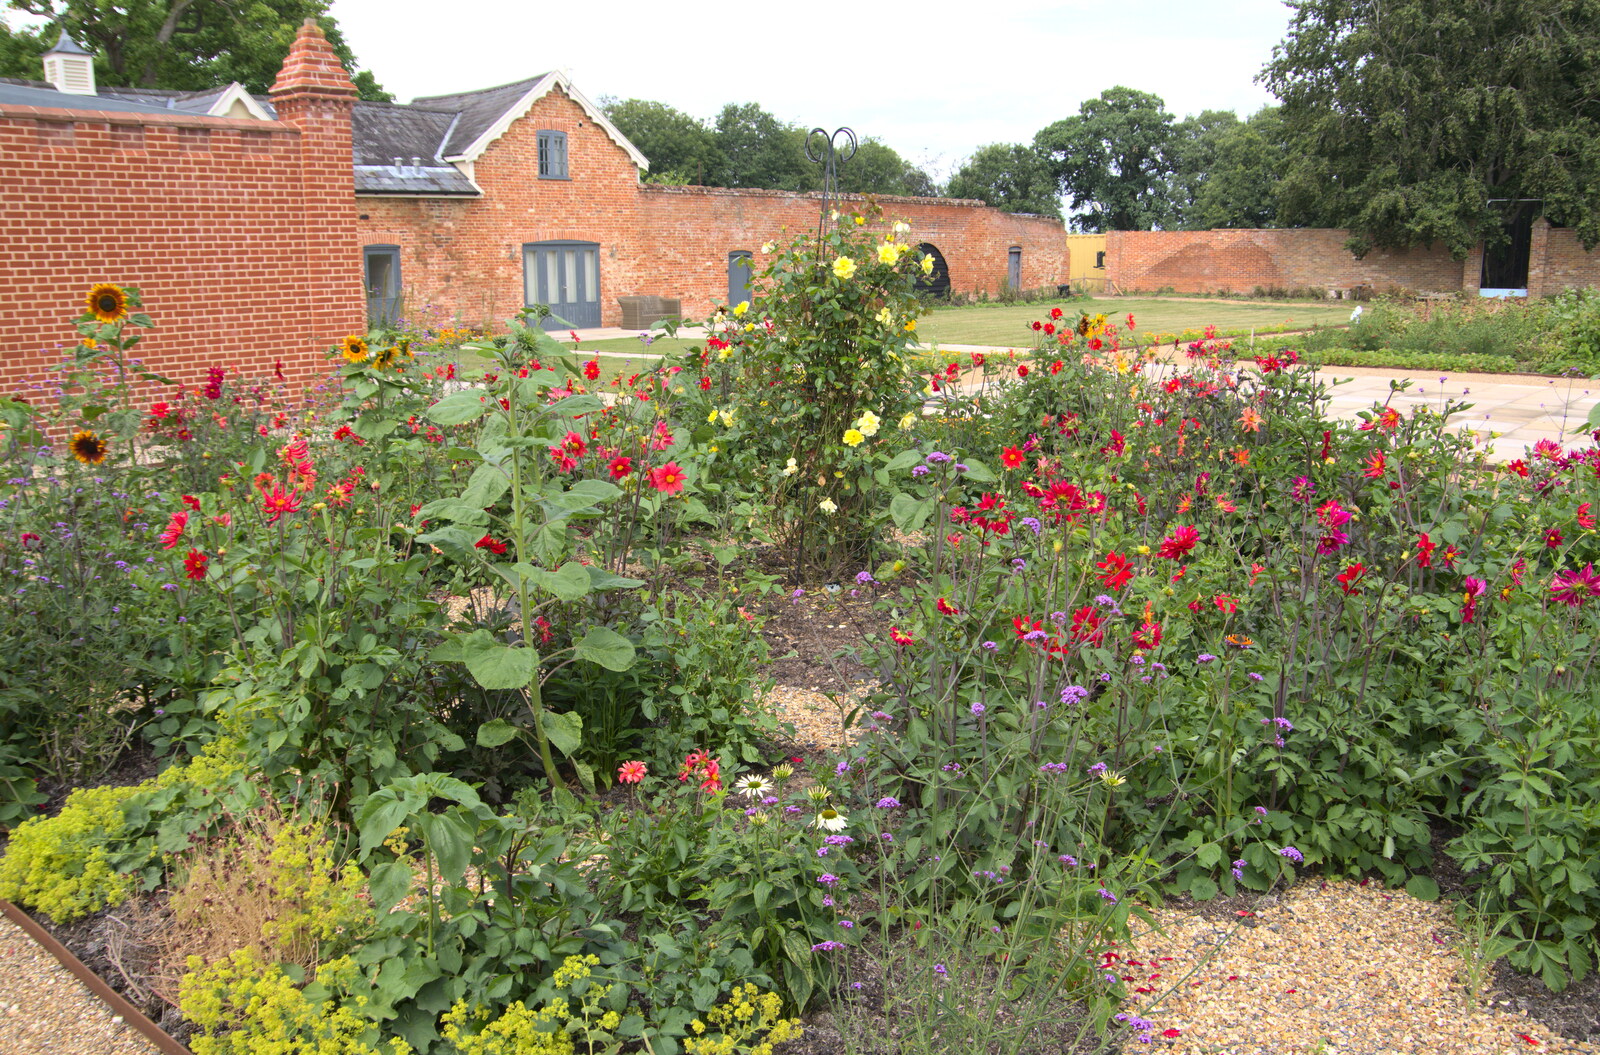 There's a nice flower bed in the walled garden from Lockdown Bike Rides and an Anniversary Picnic, Mellis and Brome, Suffolk - 3rd July 2020